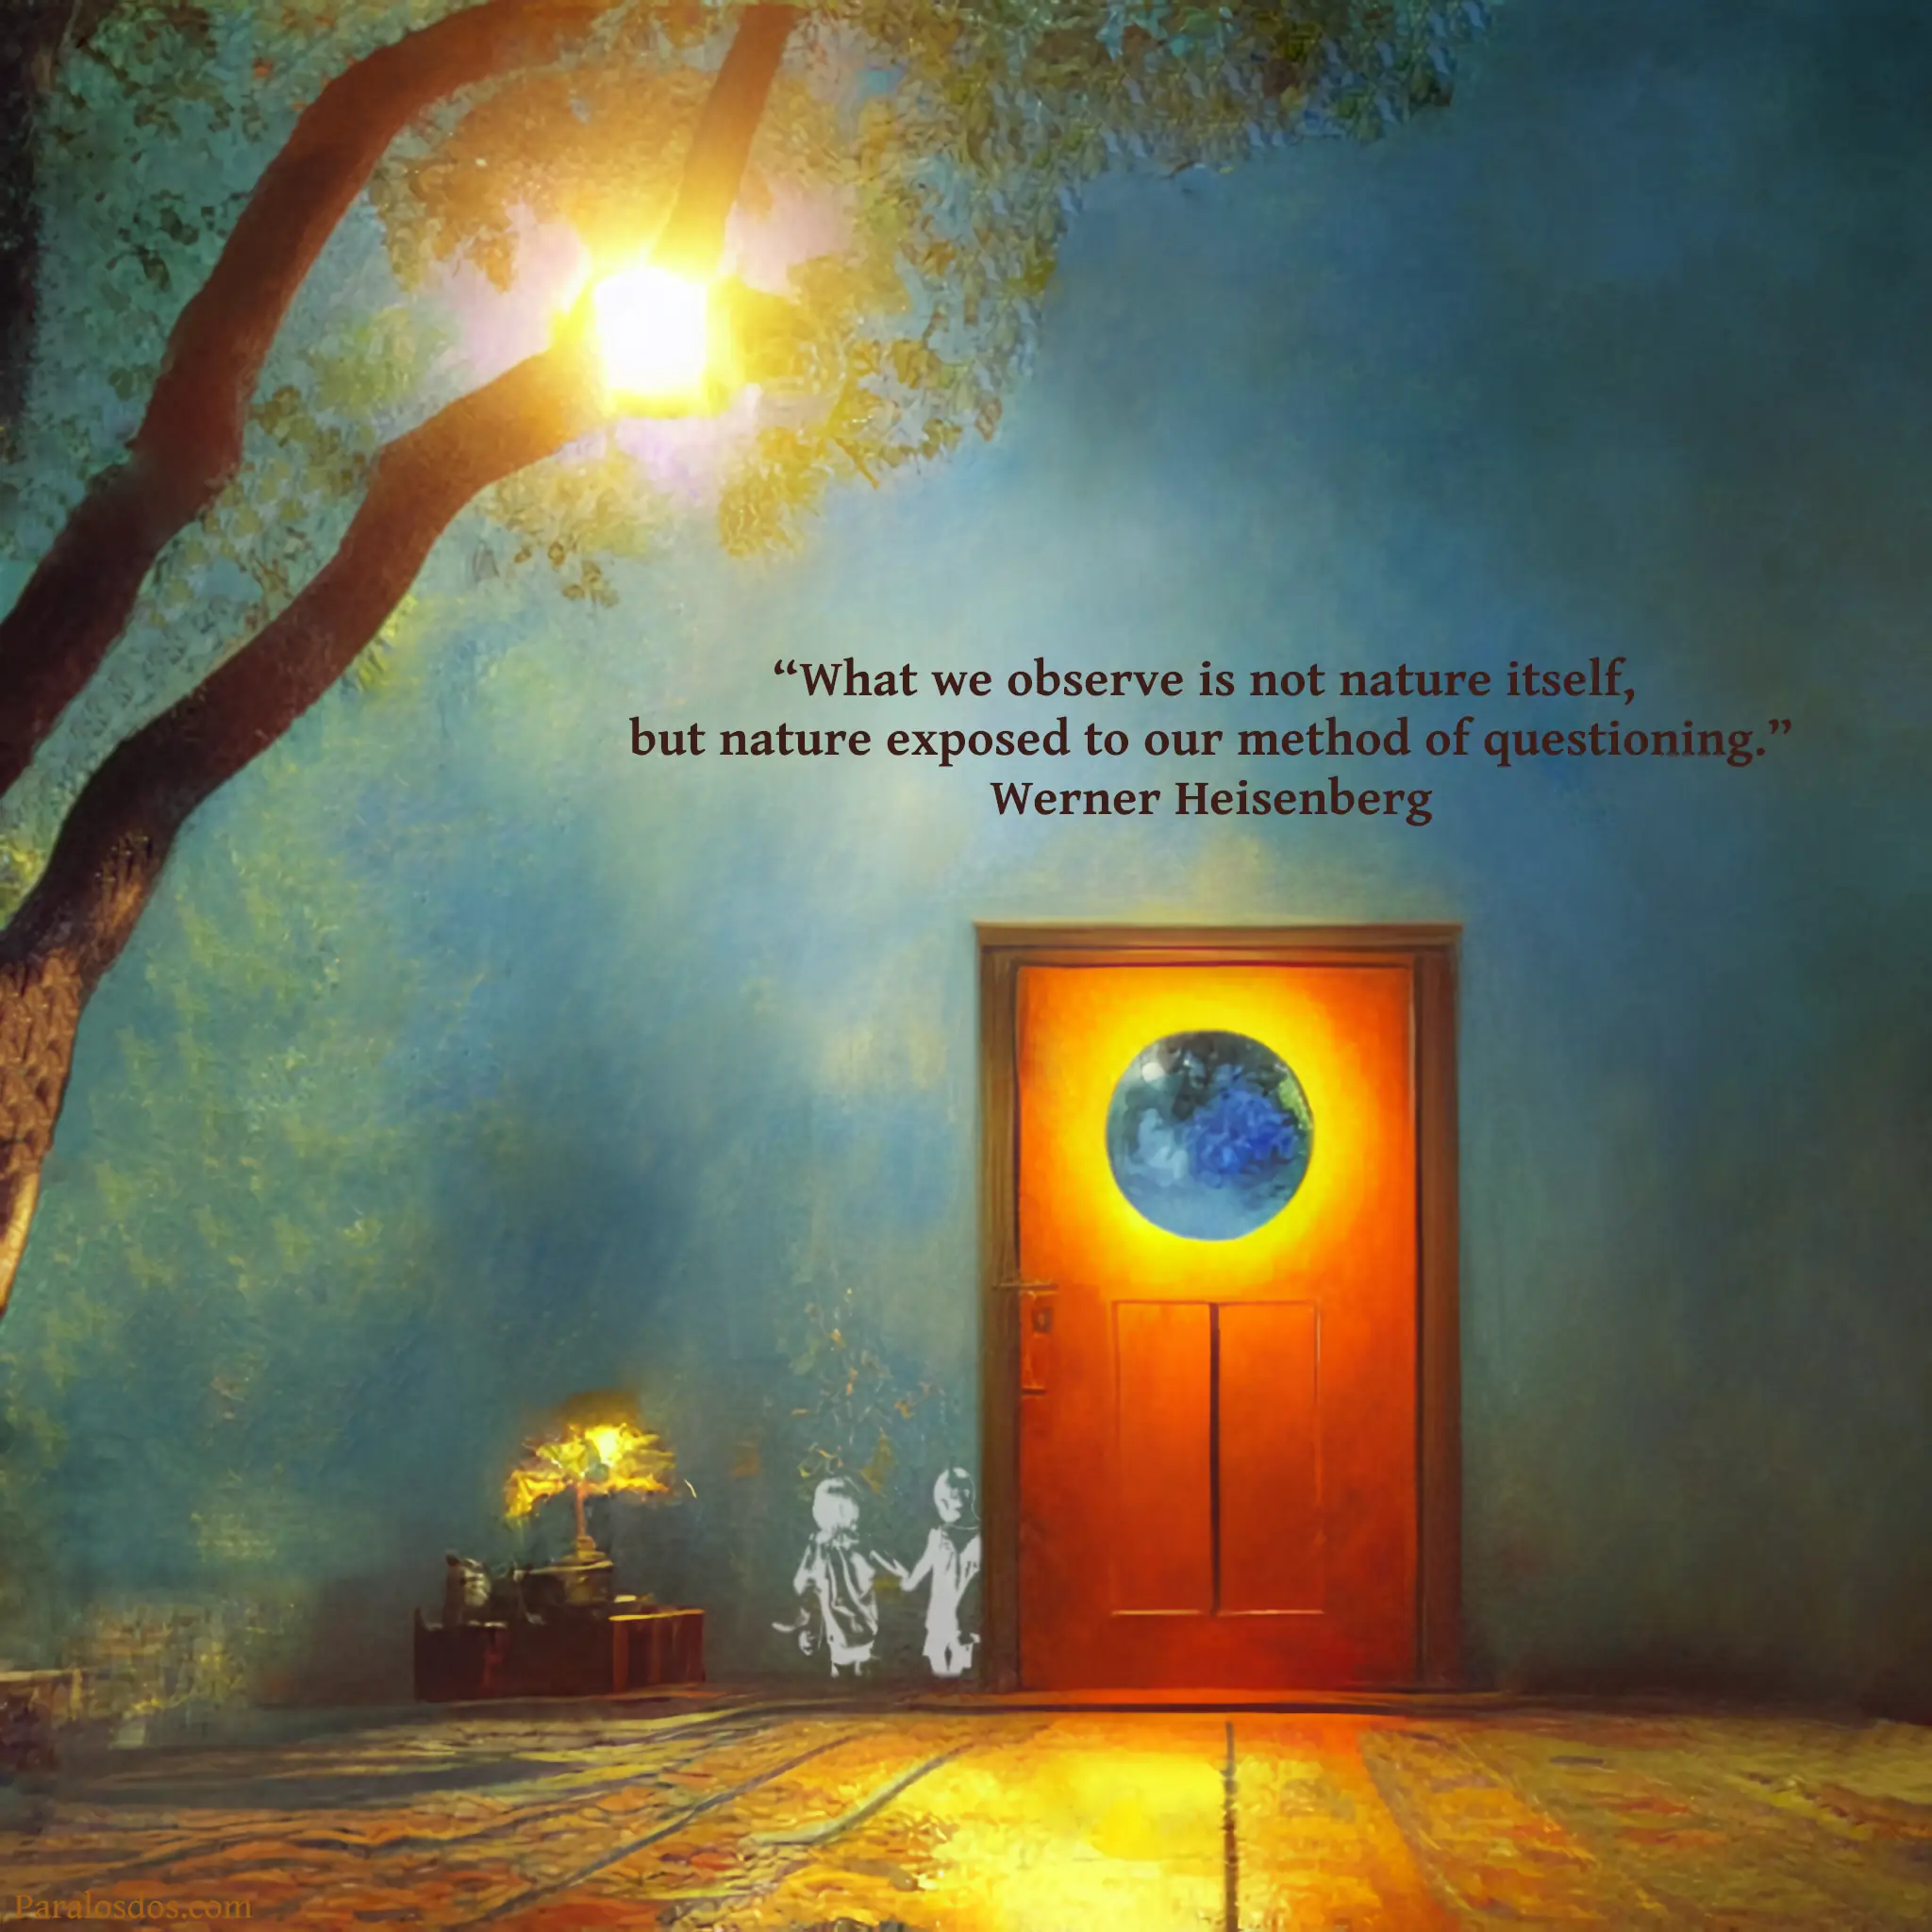 An artistic rendering of a doorway in front of a very old floor. The door has a glowing world in it. There is no wall behind the door, just space and the hint of a forest. The quote reads: “What we observe is not nature itself, but nature exposed to our method of questioning.” Werner Heisenberg